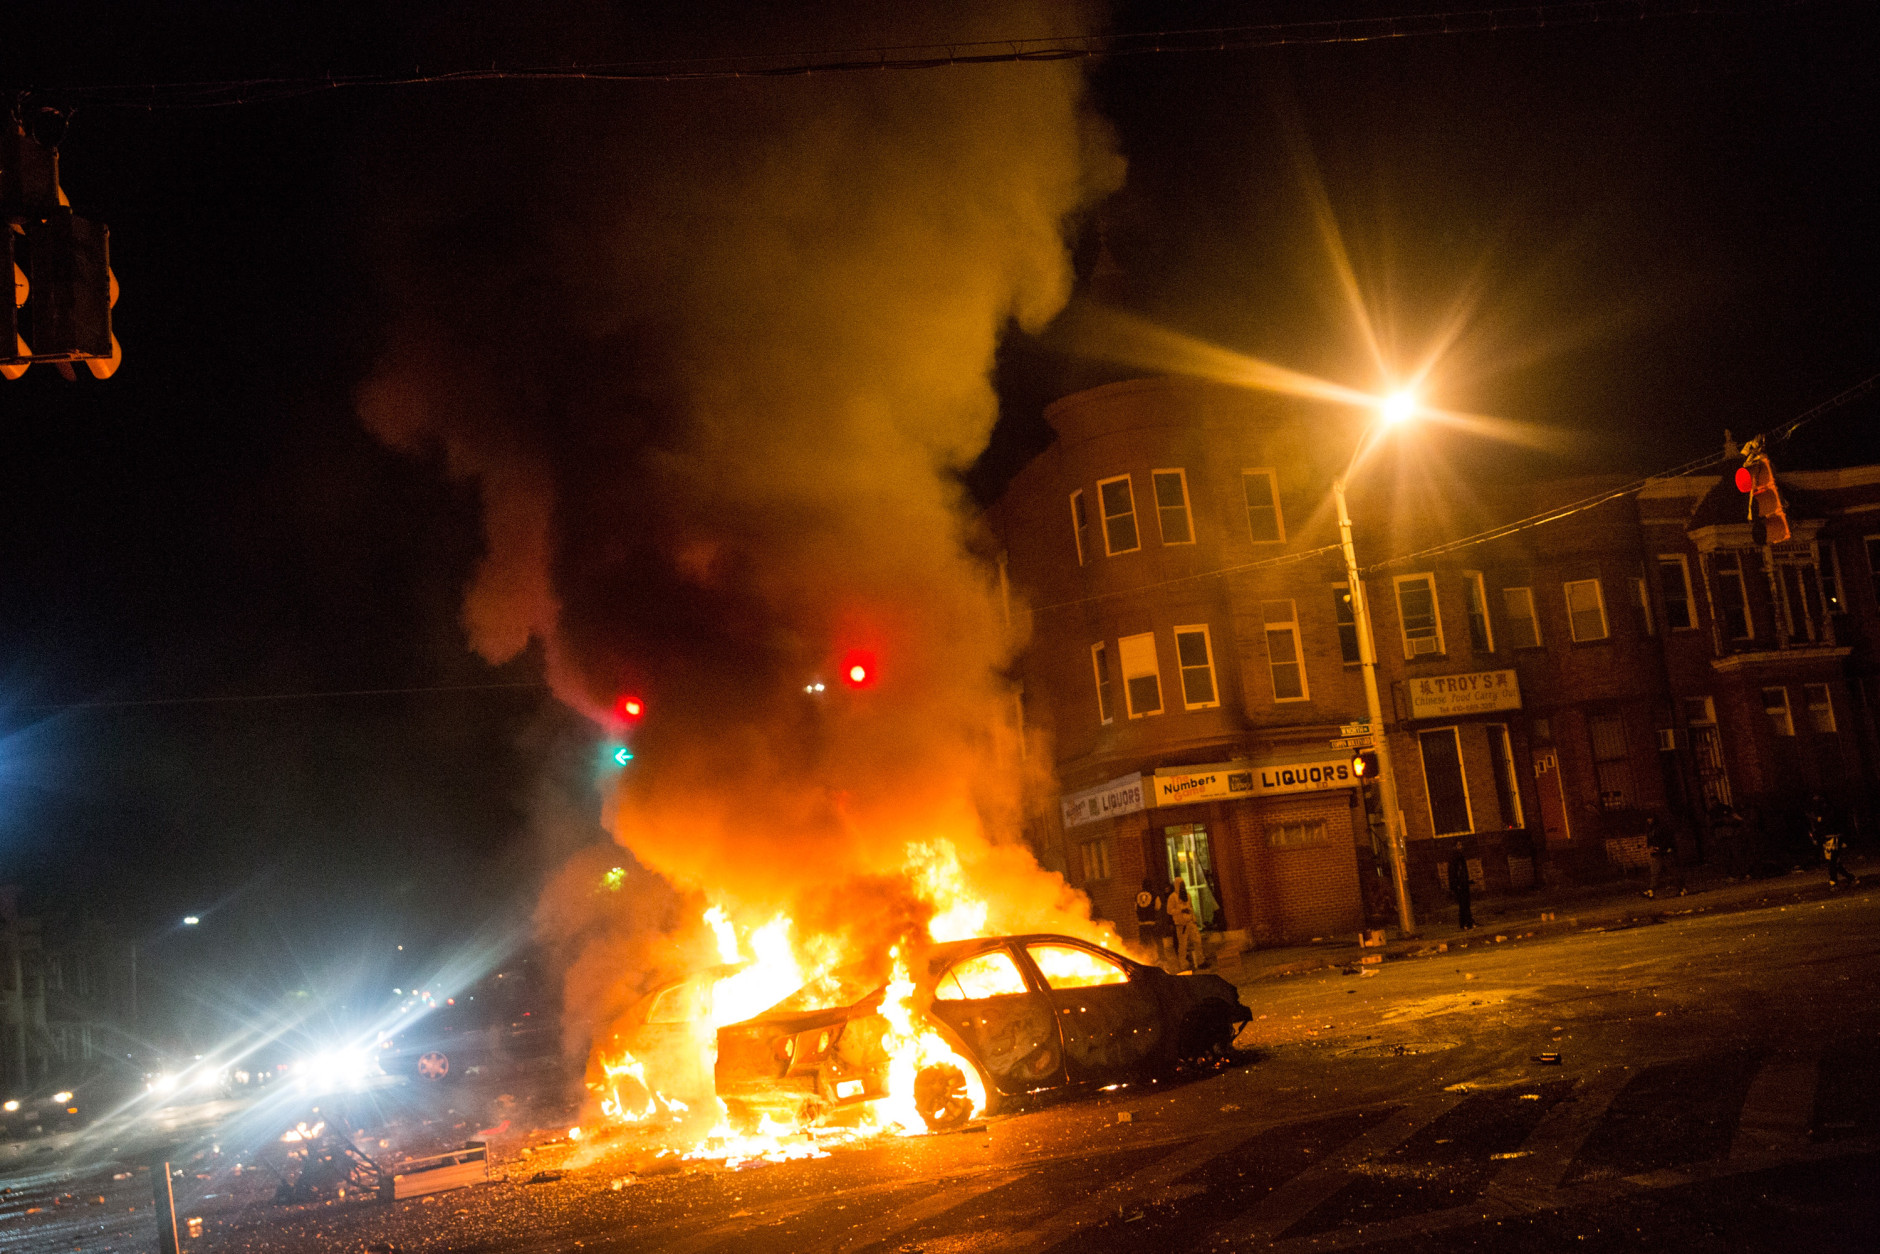 BALTIMORE, MD - APRIL 27:  Two cars burn in the middle of an intersection at New Shiloh Baptist Church on April 27, 2015 in Baltimore, Maryland. Riots have erupted in Baltimore following the funeral service for Freddie Gray, who died last week while in Baltimore Police custody.  (Photo by Andrew Burton/Getty Images)